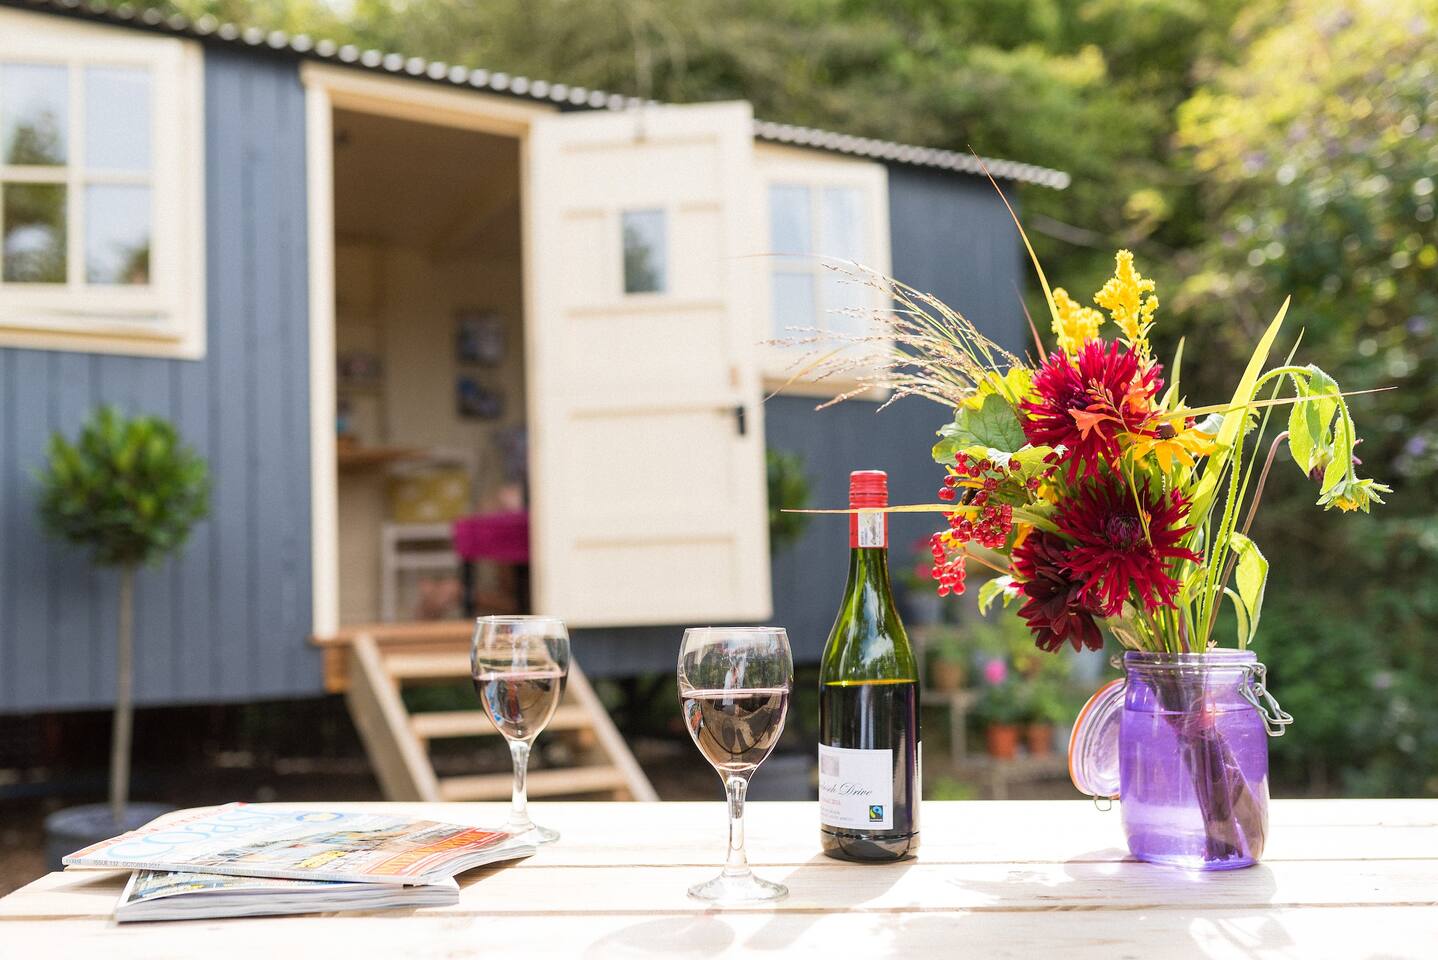 wooden-table-with-red-wine-and-flowers-in-front-of-hut-next-the-sea-shepherds-hut